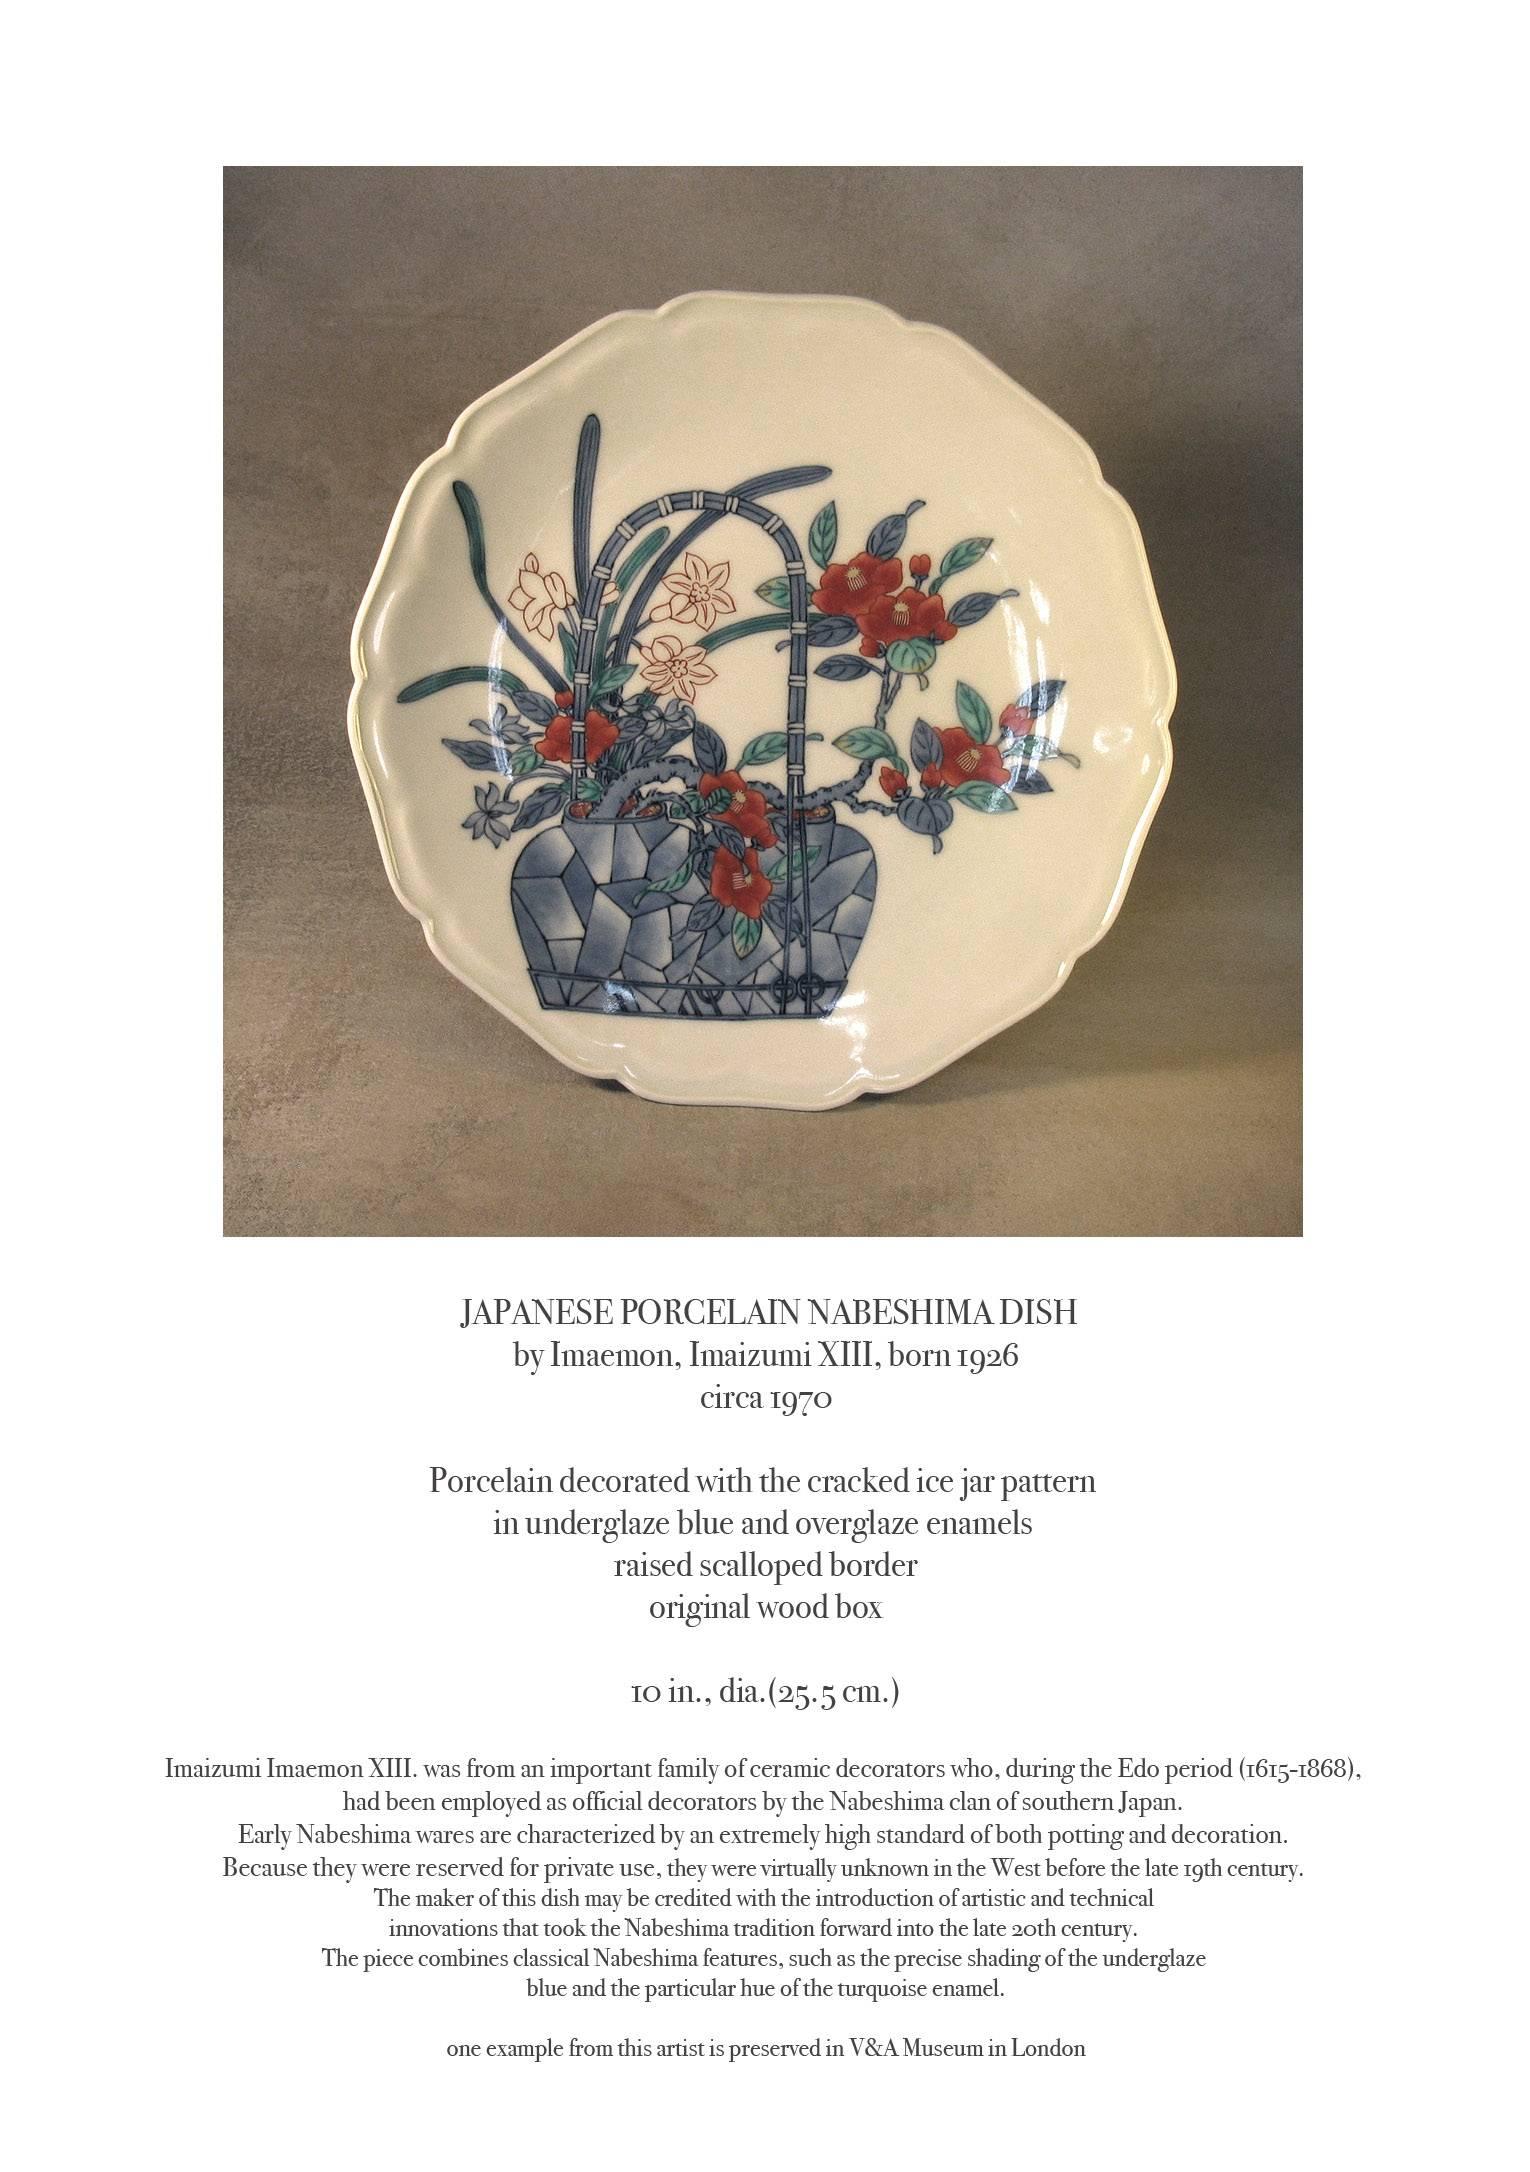 Japanese Porcelain Nabeshima Plate by Imaemon, Imaizumi XIII, born 1926, the plate is circa 1970. Porcelain decorated with the cracked ice jar pattern in under glaze enamels, raised scalloped border and in the original wood box. The plate measures